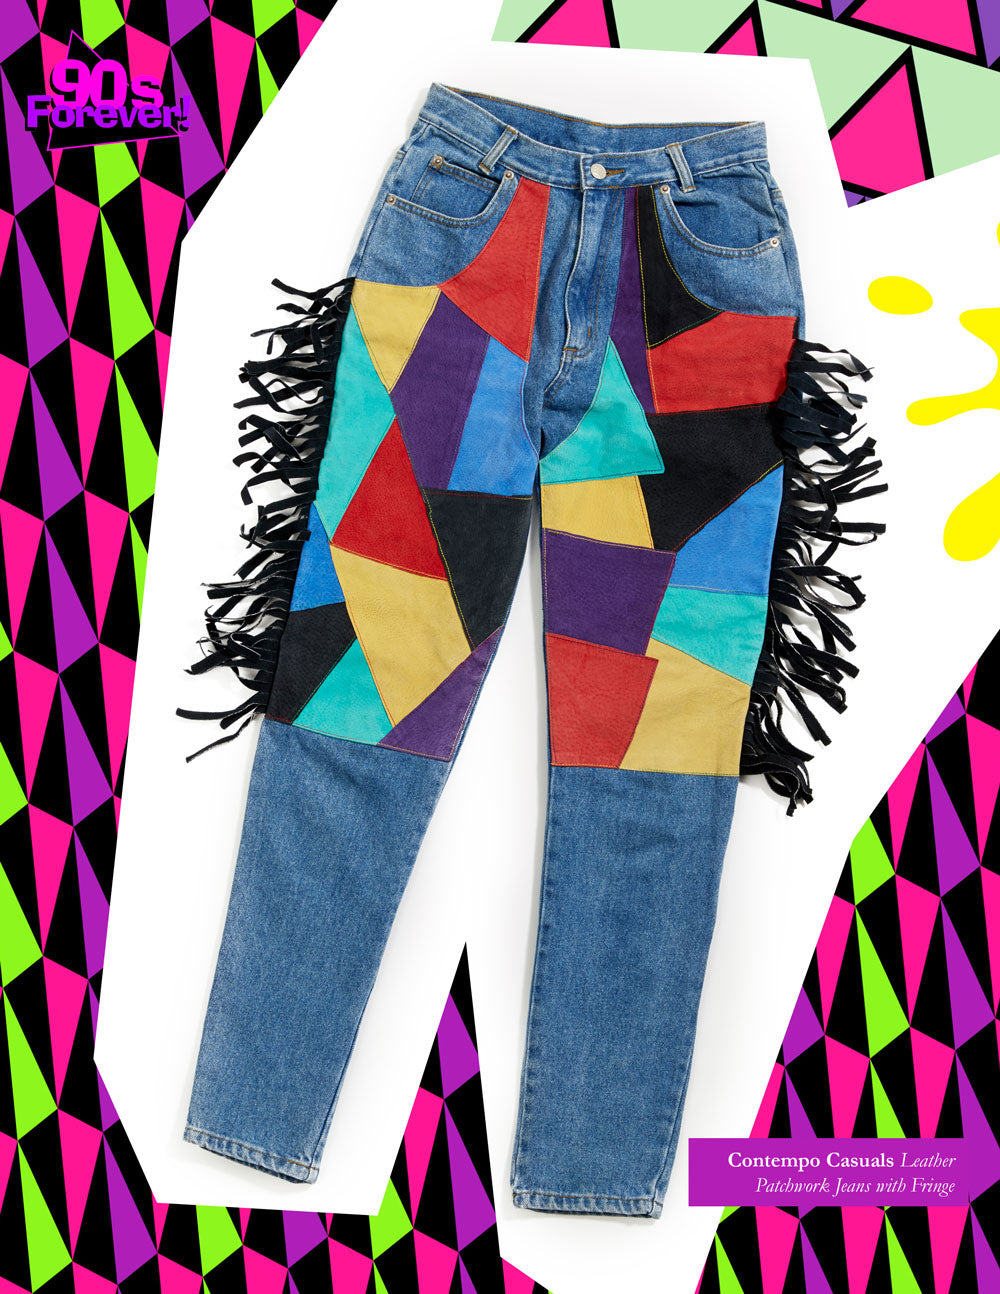 90s Forever Retro Vintage Fashion Apparel Lookbook - Contempo Casuals Leather Patchwork Jeans with Fringe